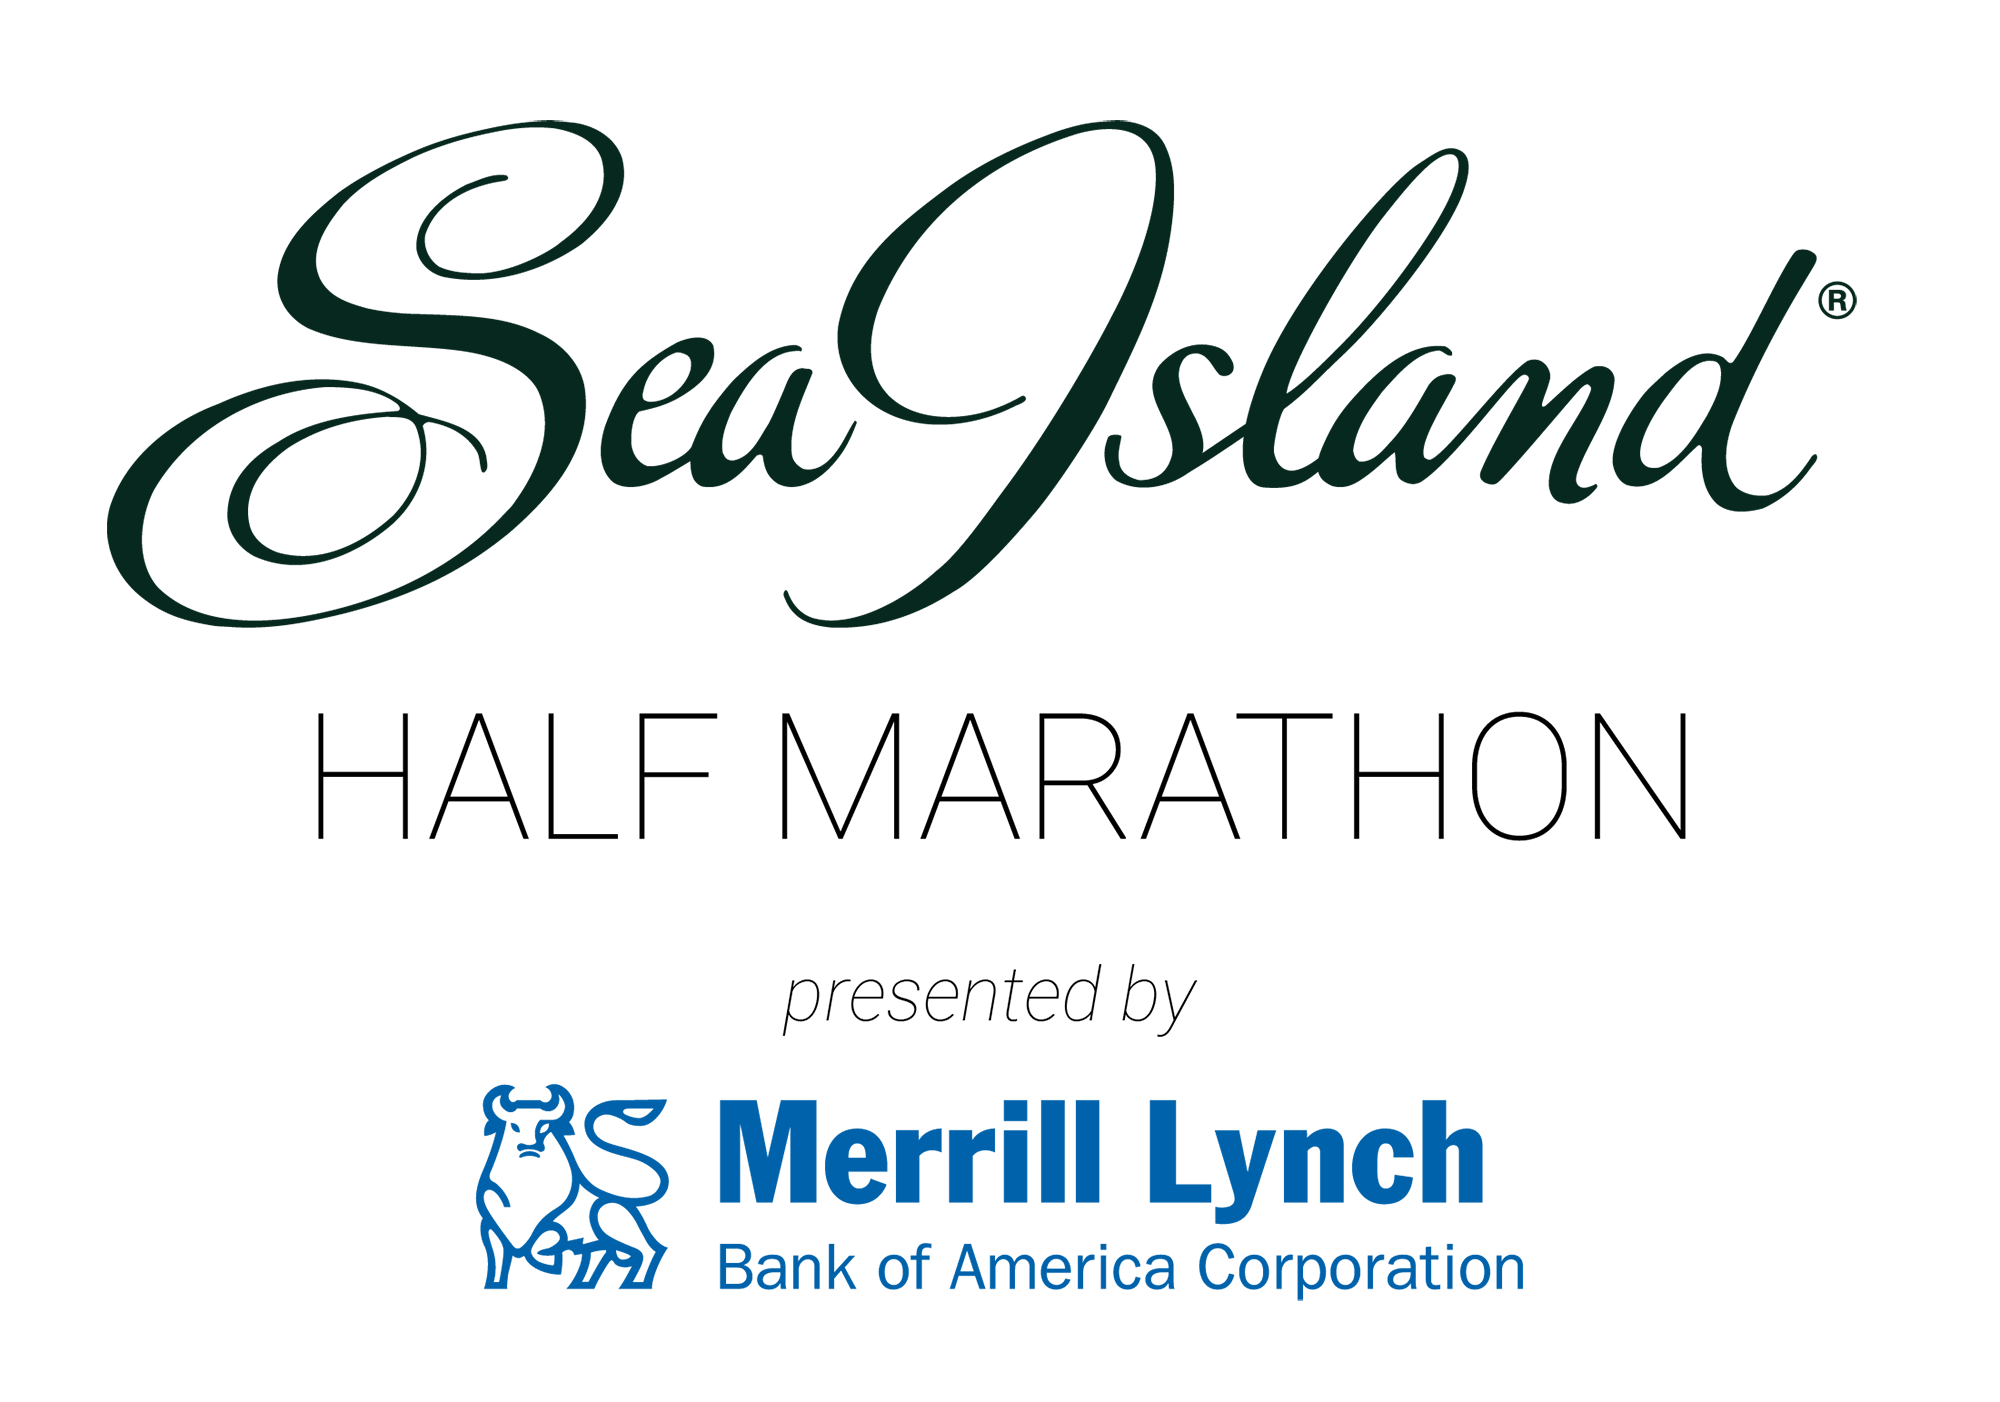 Merrill Lynch and Bank of America Named Presenting Sponsors of Sea